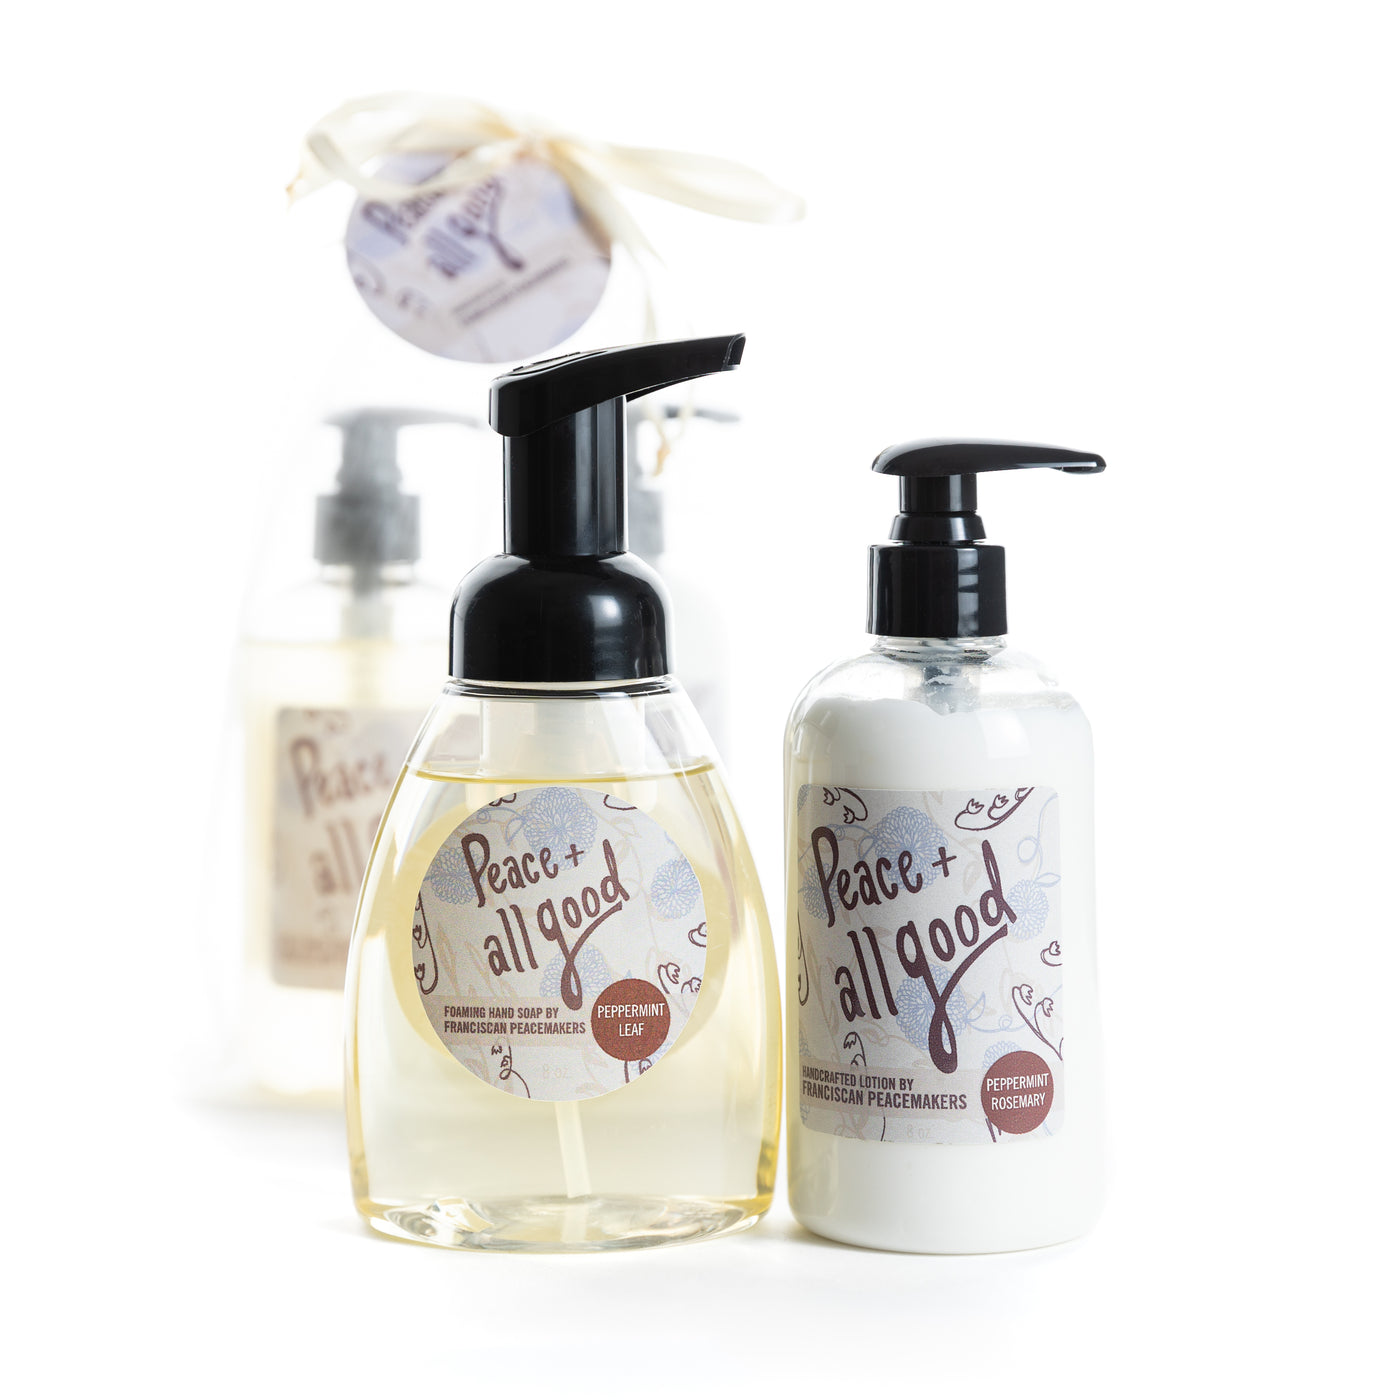 Foaming Soap & Hand Lotion Duo Package